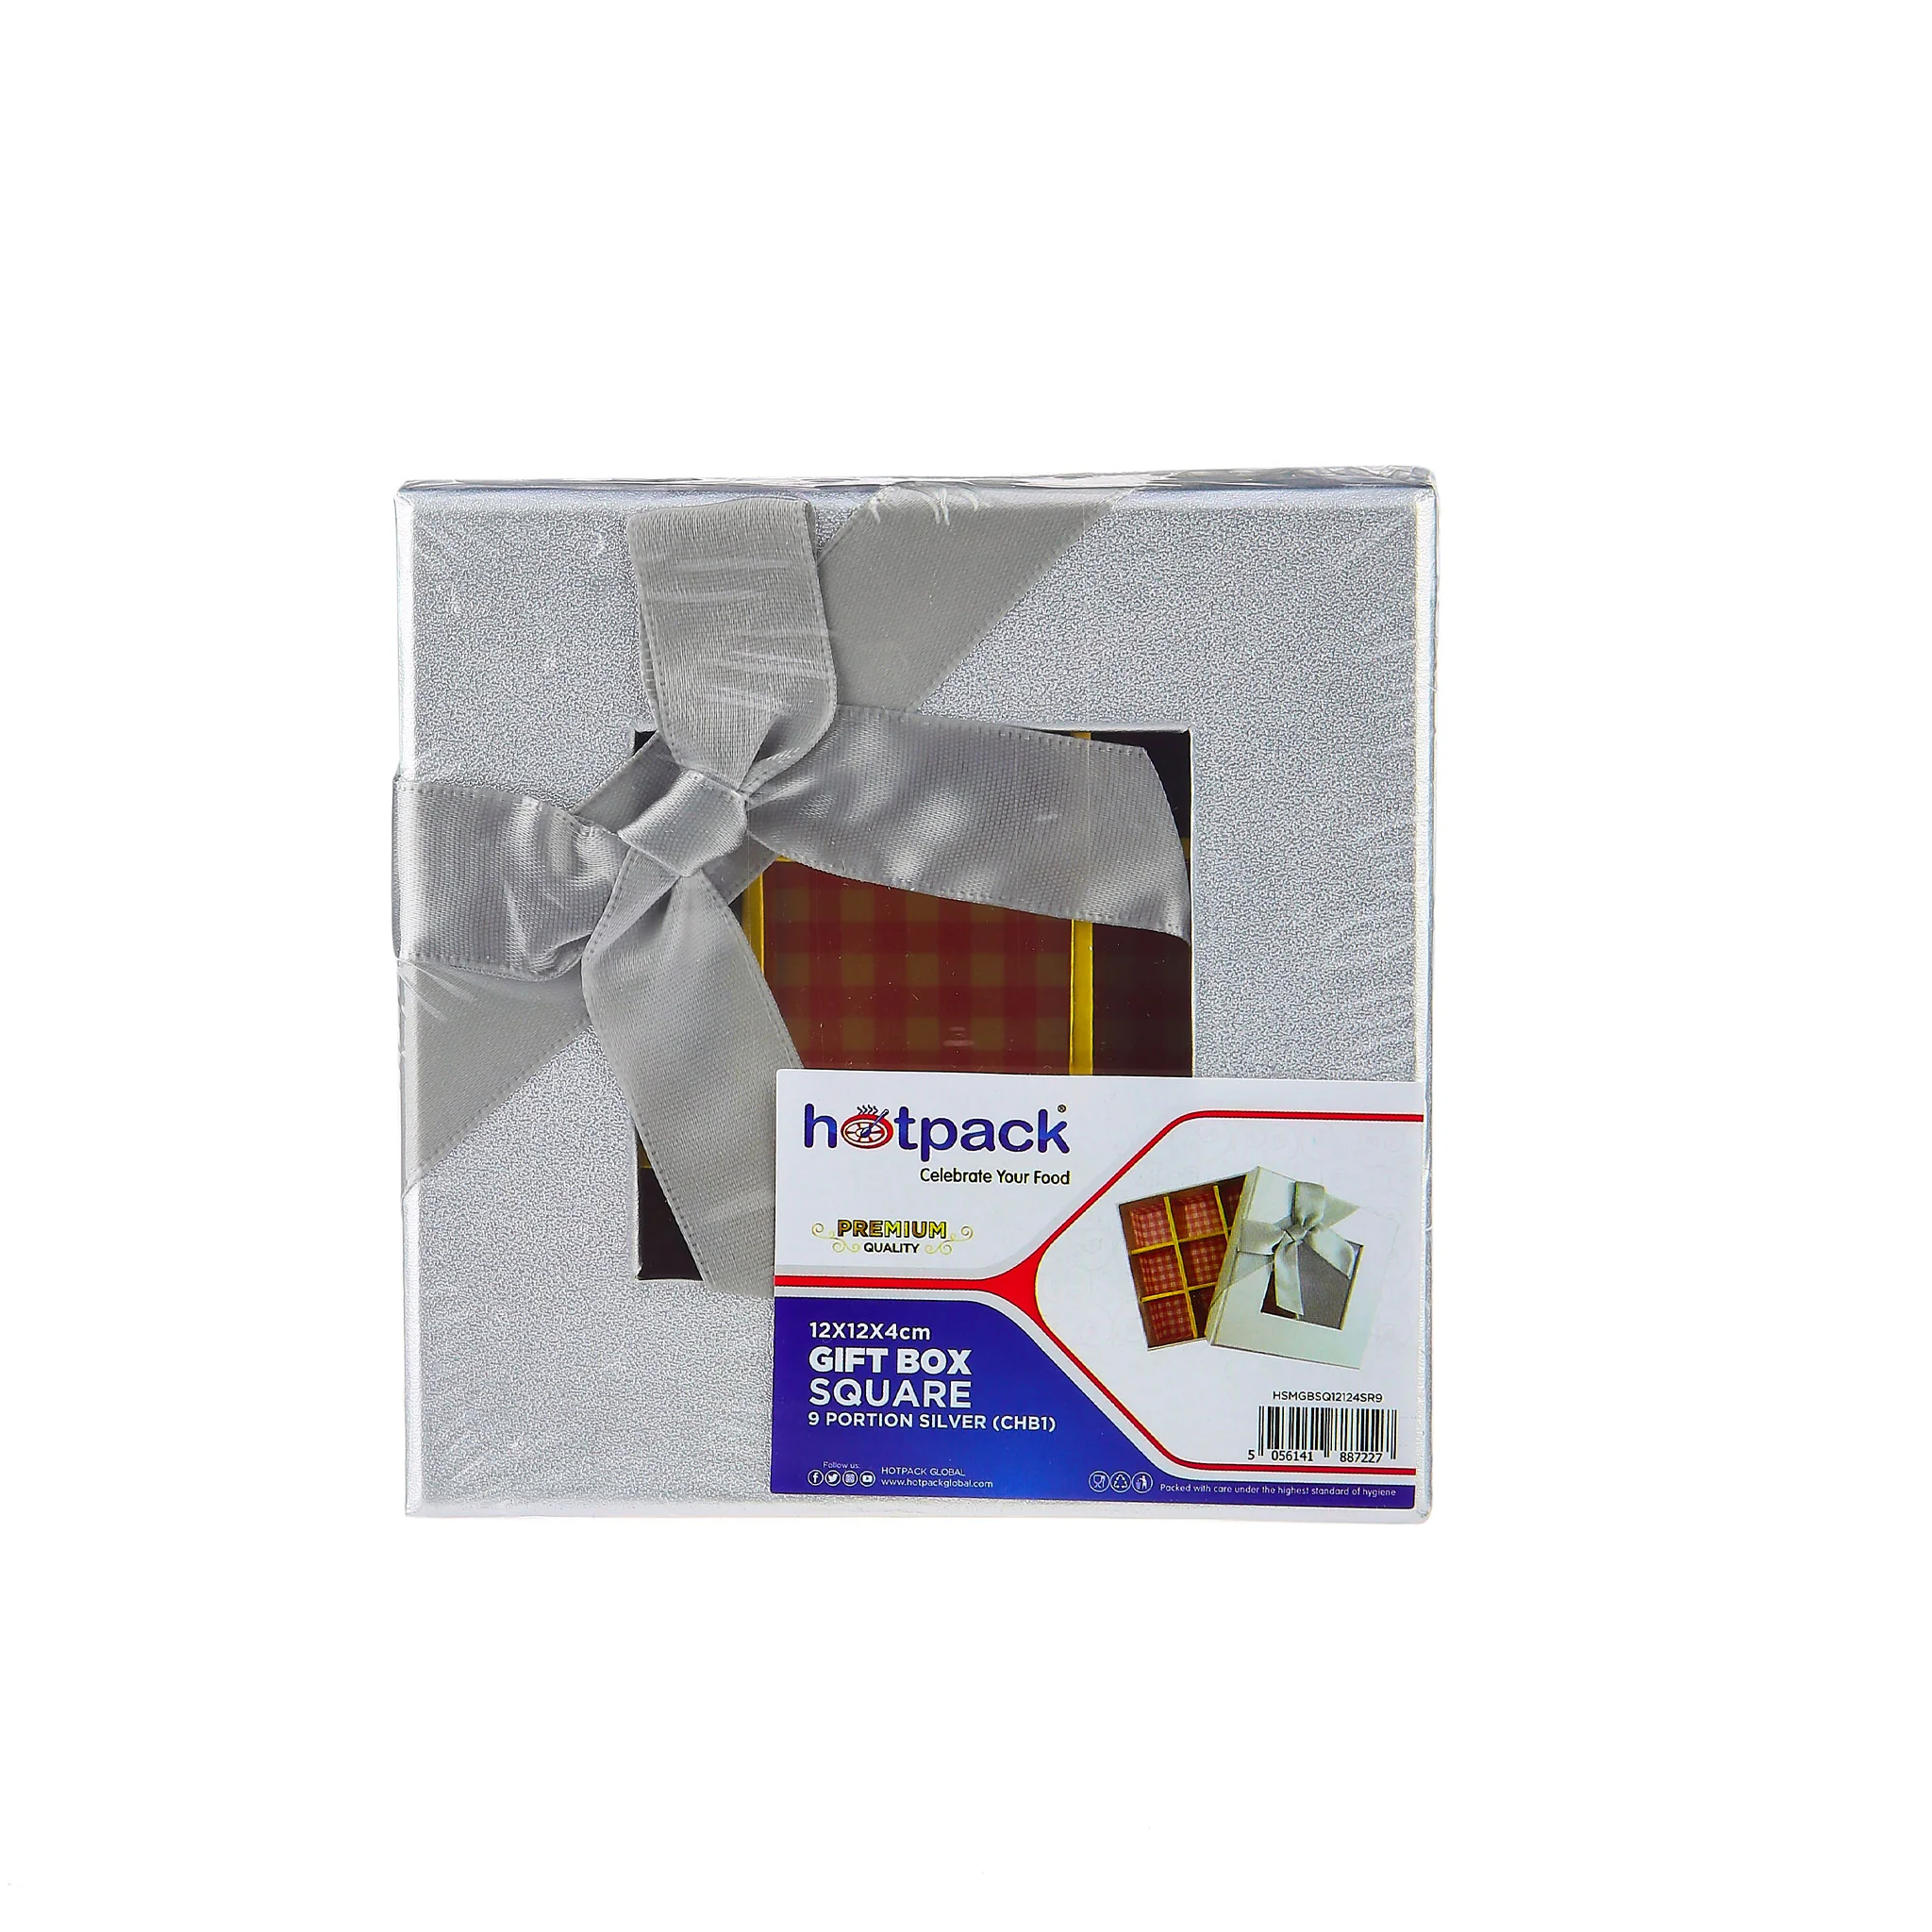  Gift Box Square 9 Portions  Silver